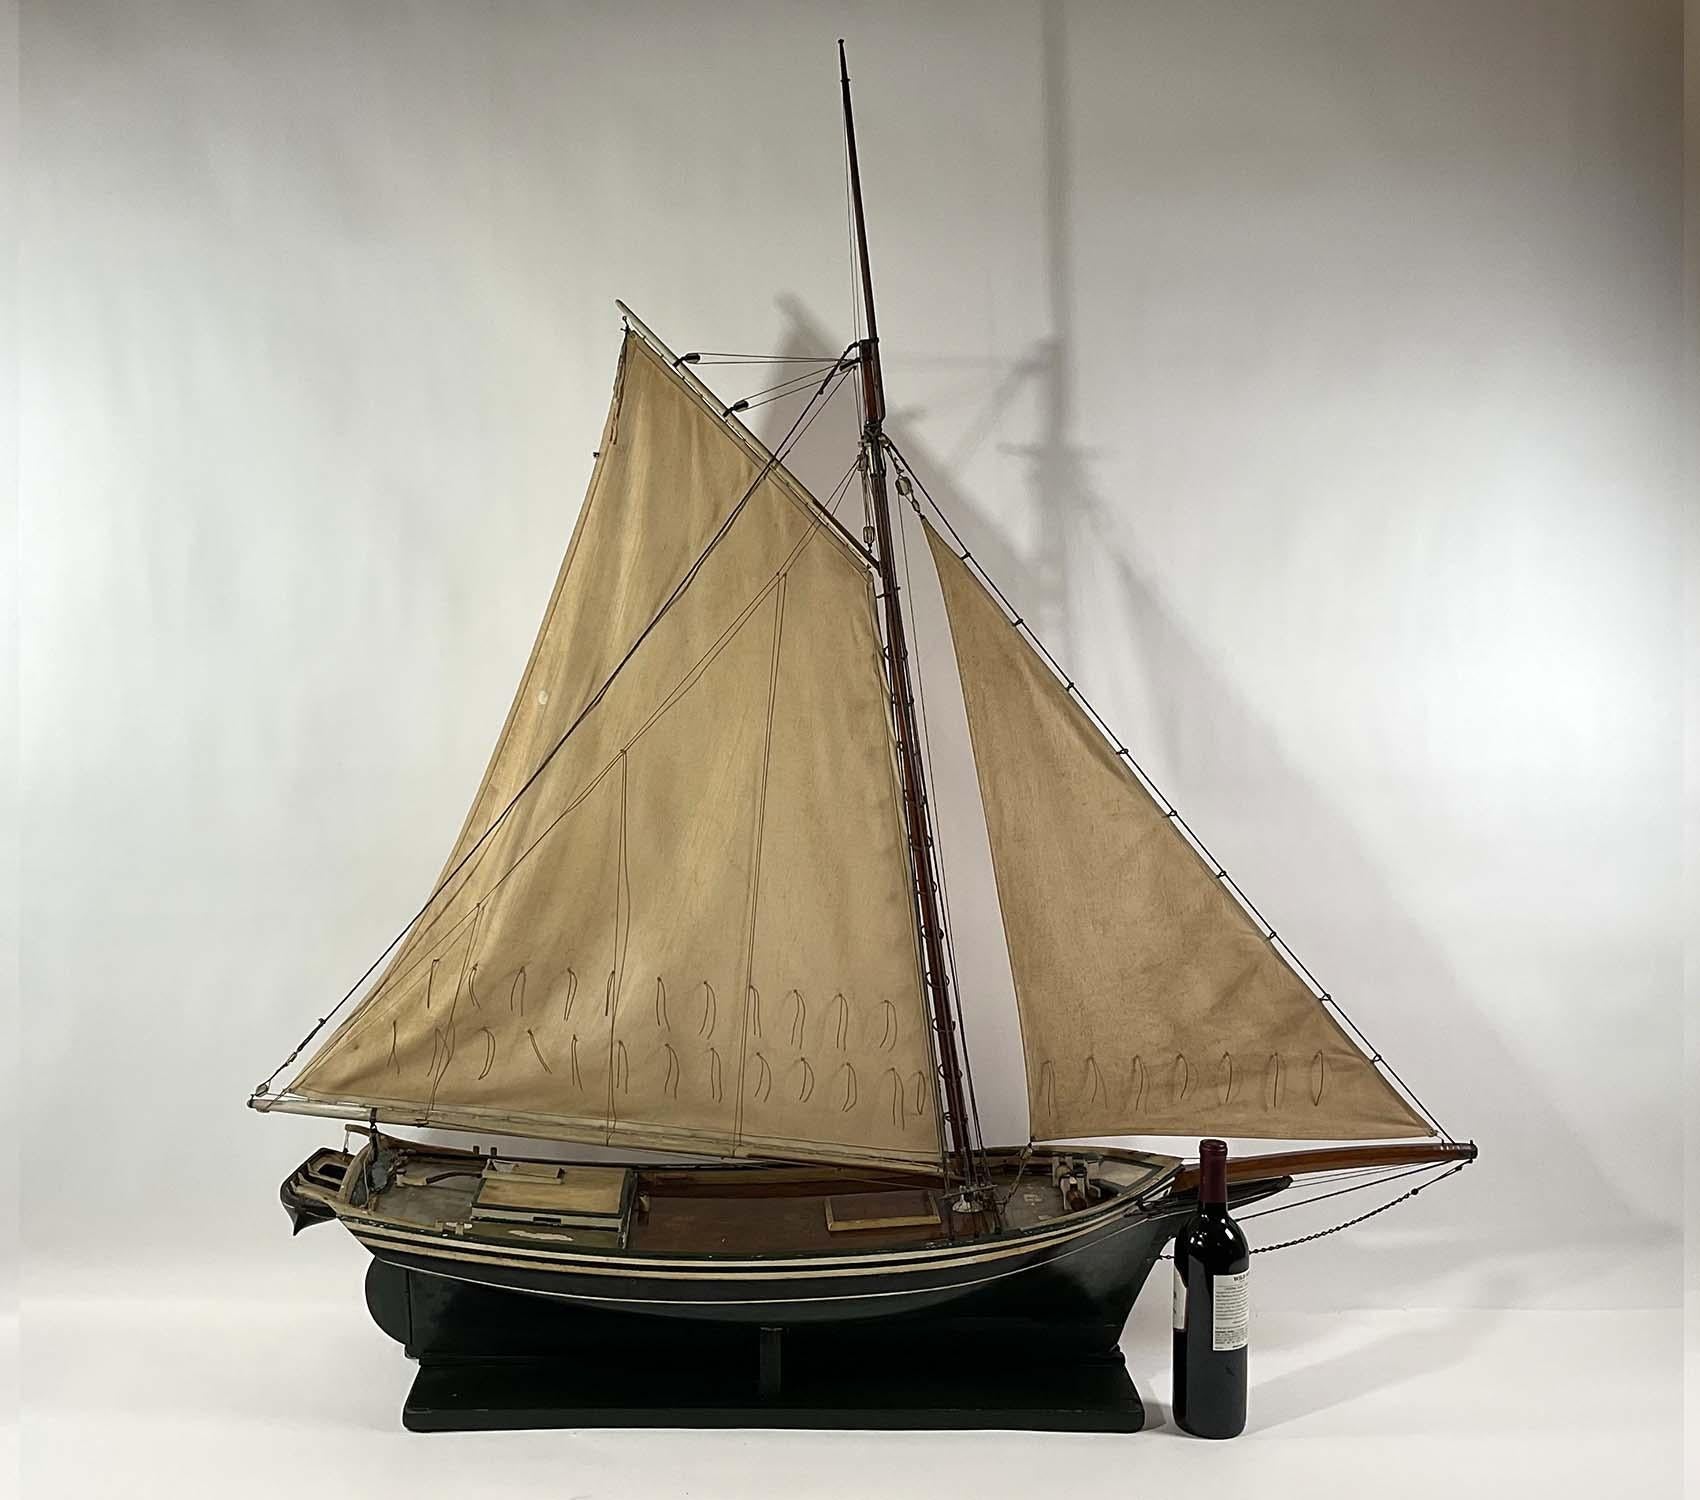 North American Model of the Oyster Sloop Fanny Fern of Quincy Mass For Sale